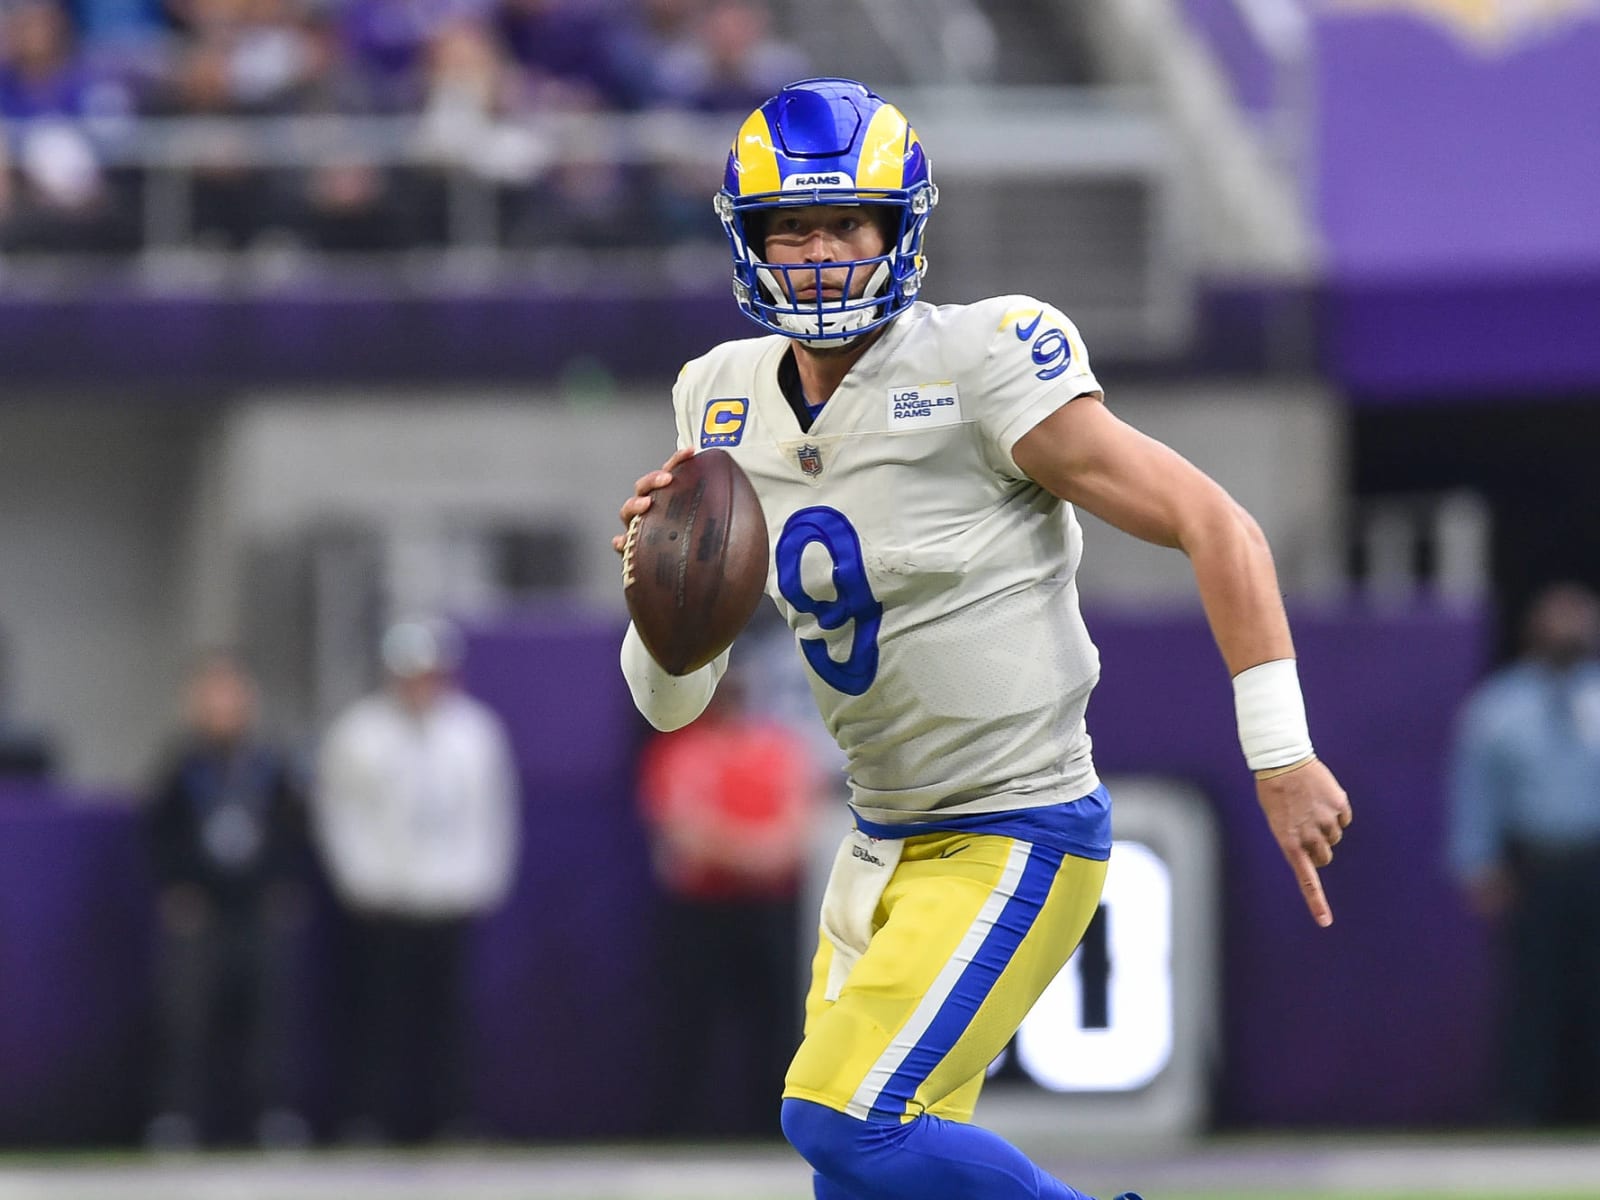 Jersey color trend favors Rams ahead of Super Bowl